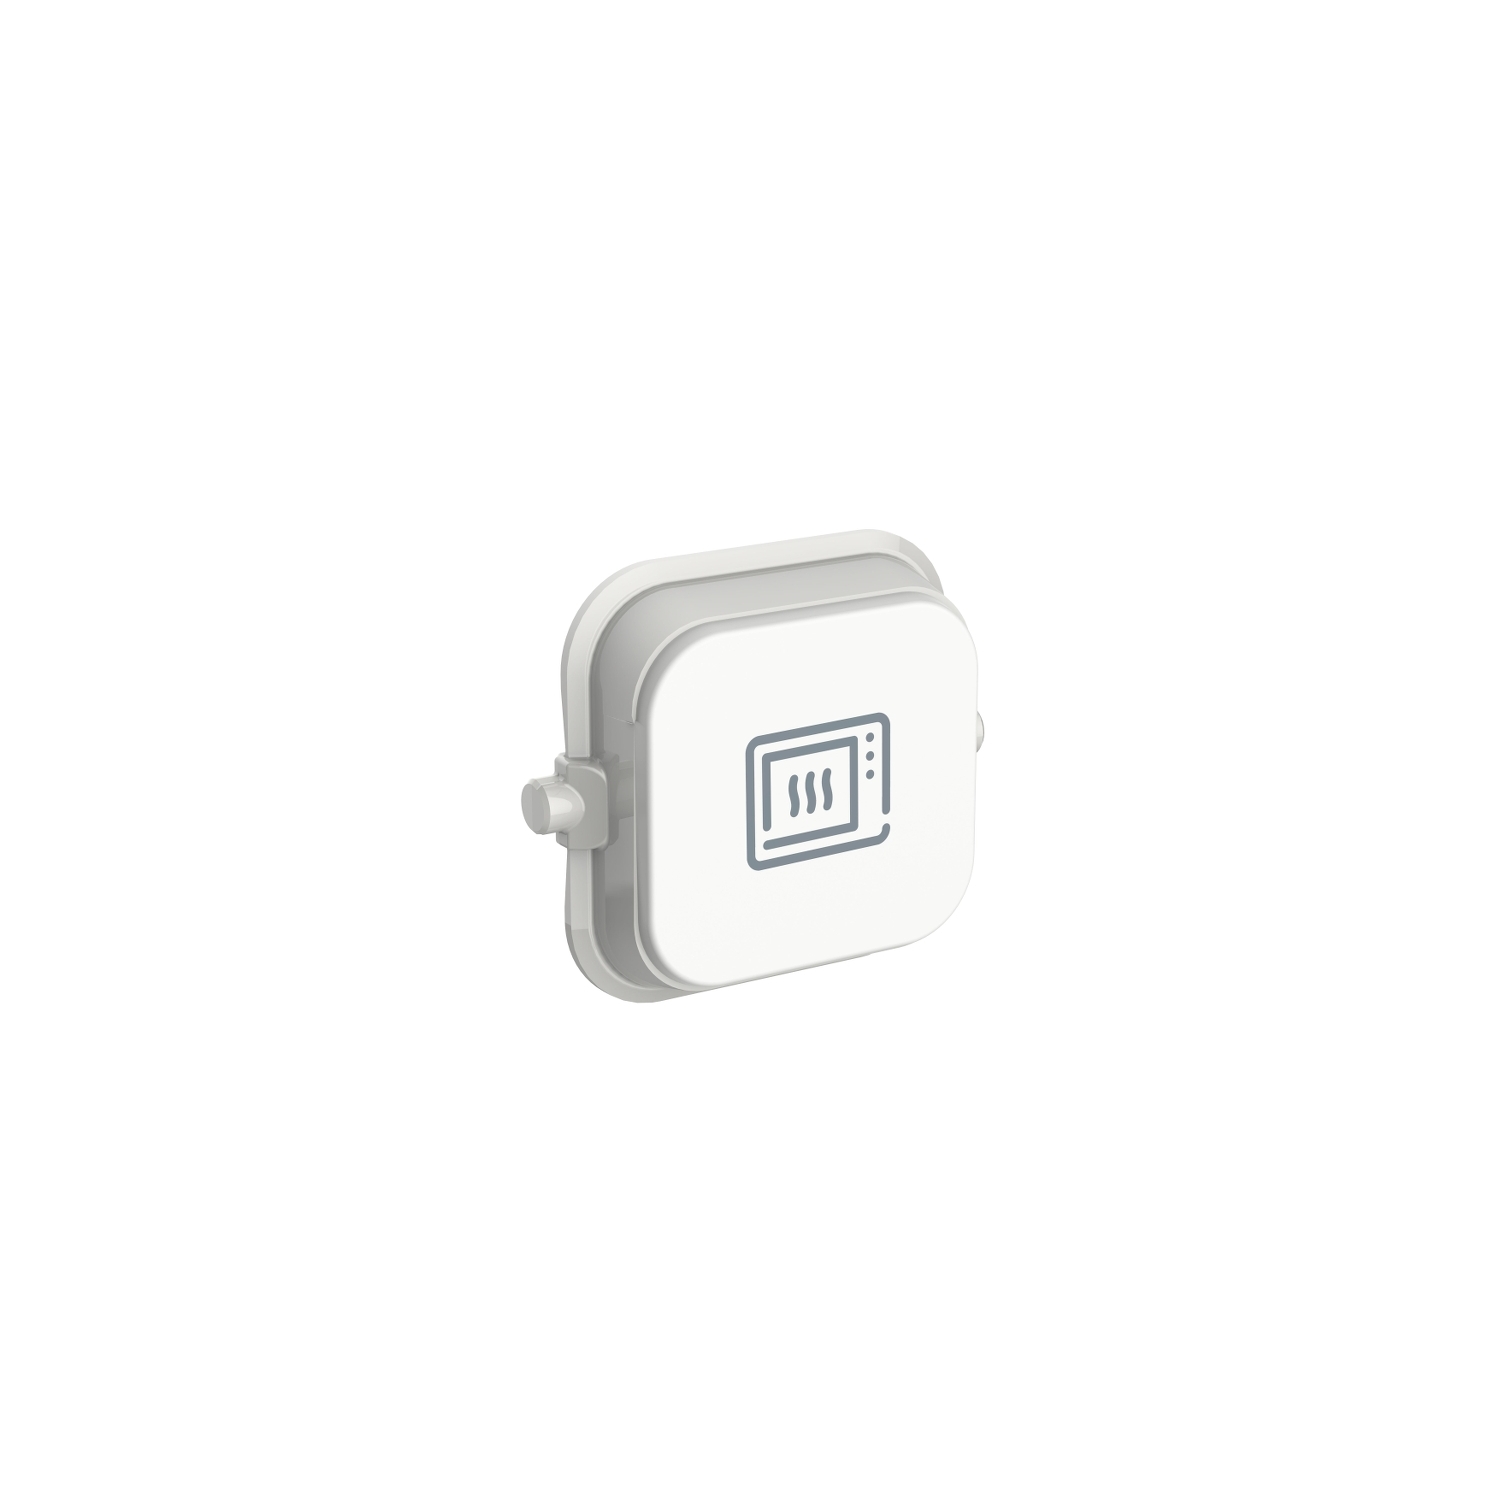 PDL Iconic - Dolly Rocker Switch MICROWAVE - Vivid White